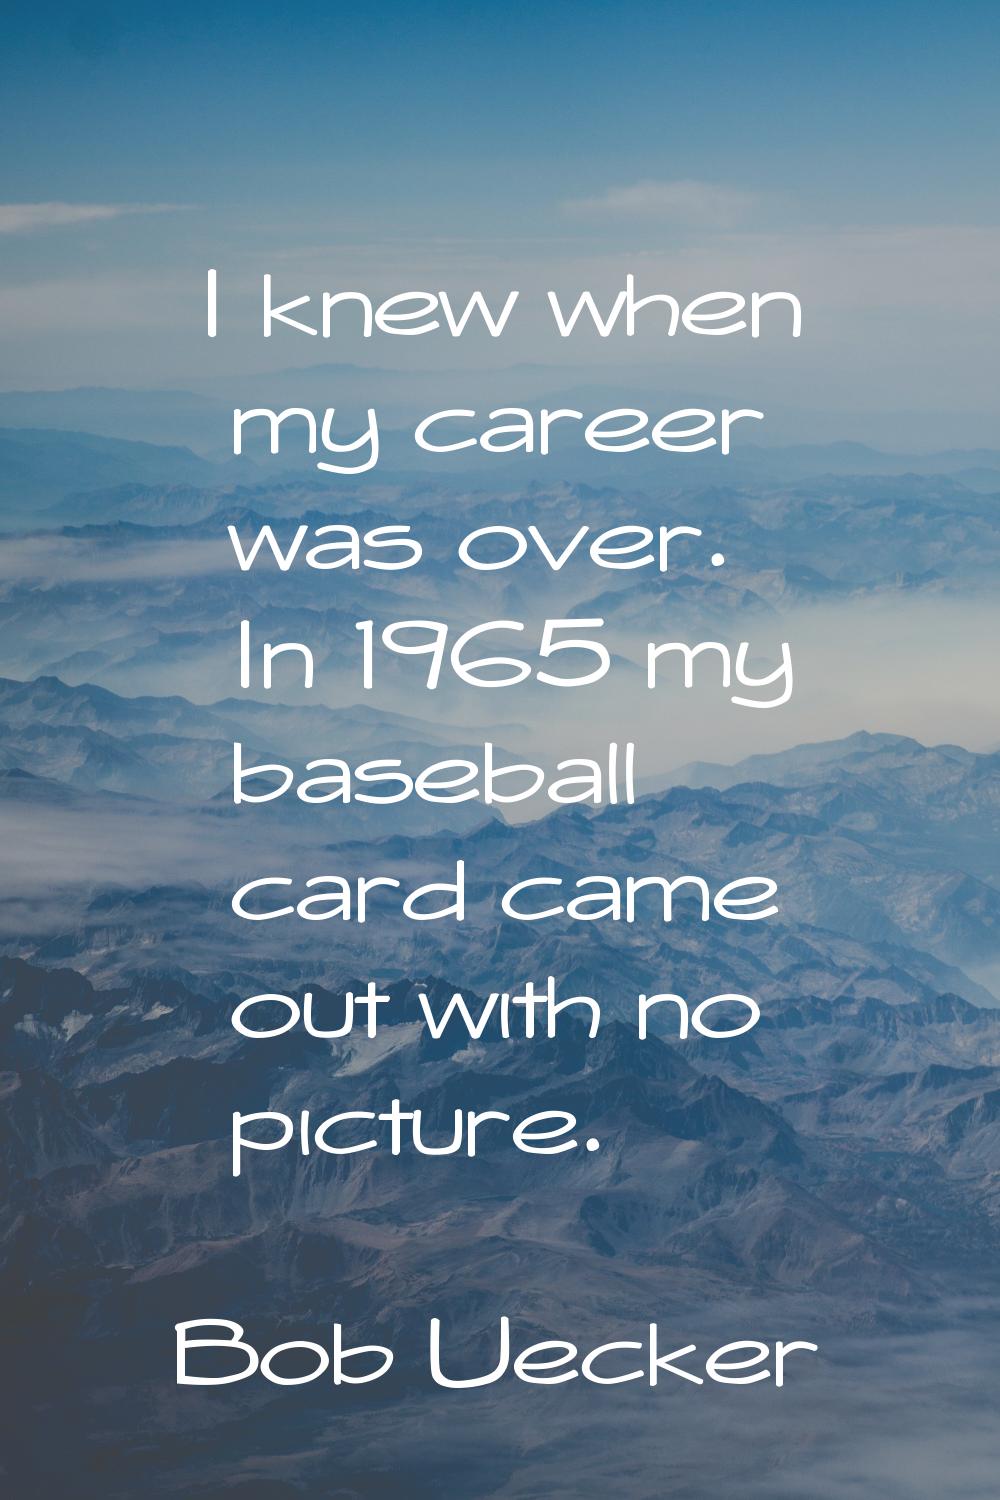 I knew when my career was over. In 1965 my baseball card came out with no picture.